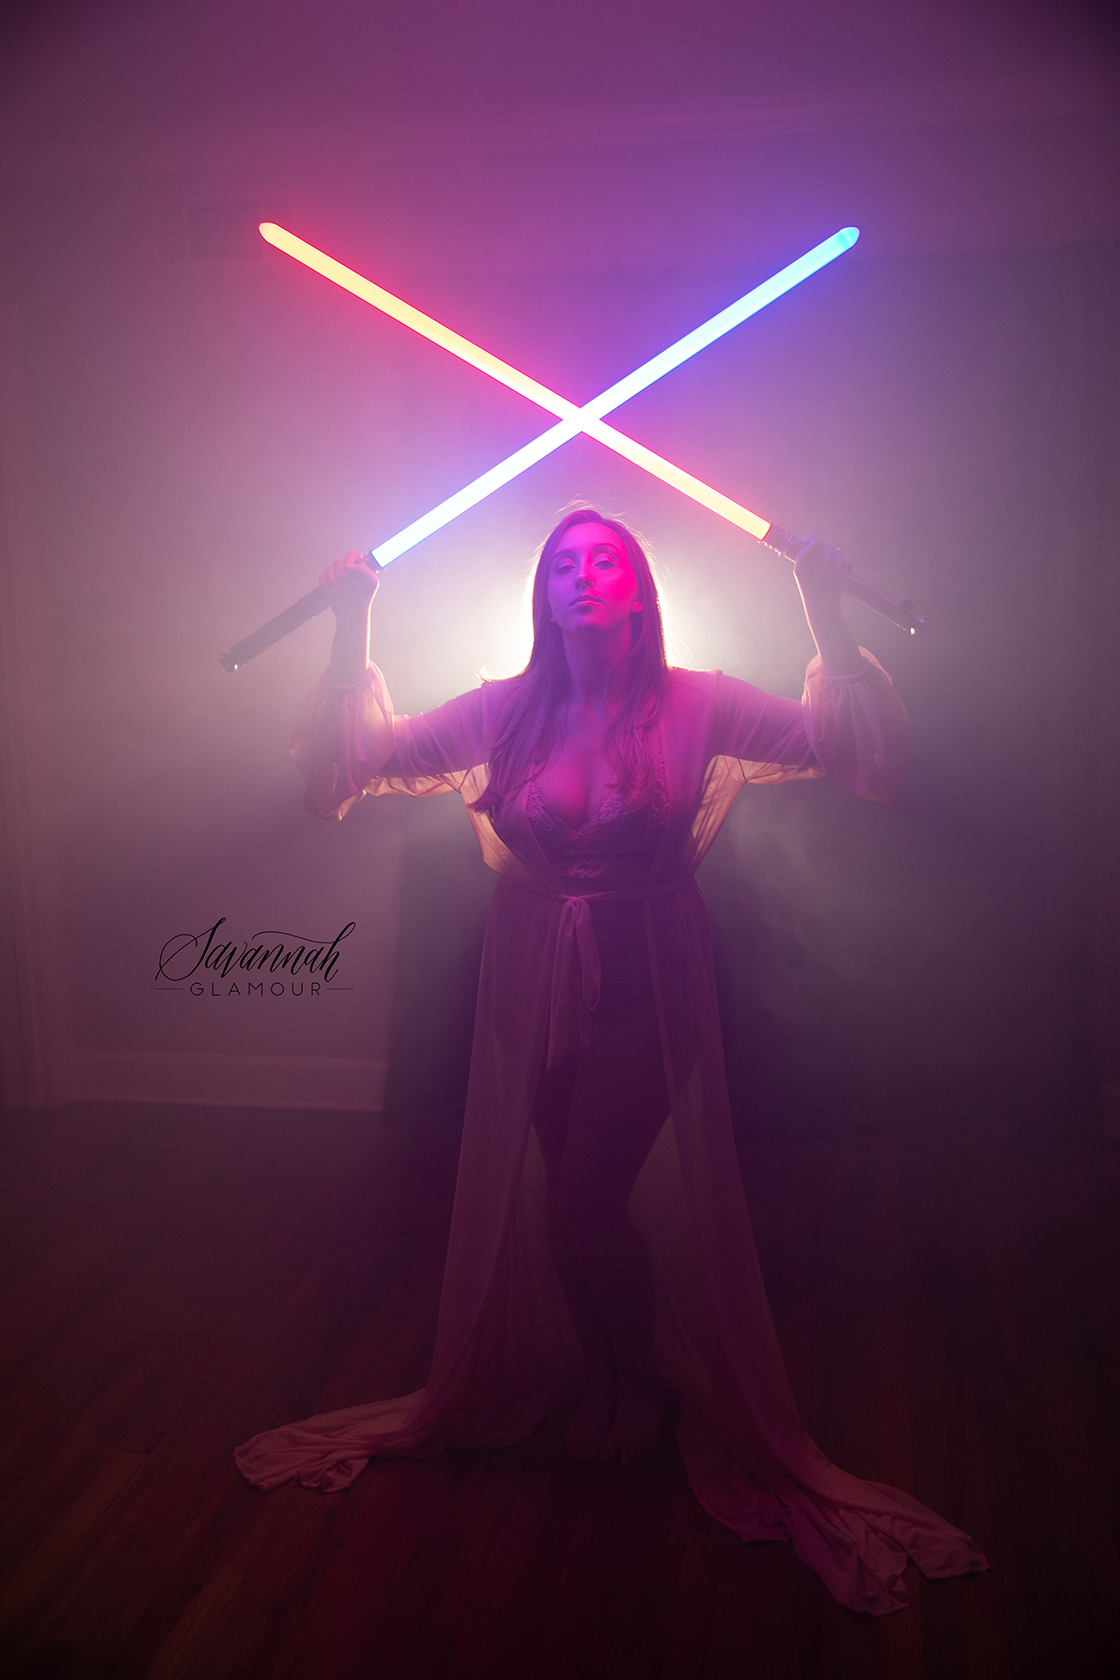 woman in a sheer dress posing with 2 lightsabers over head